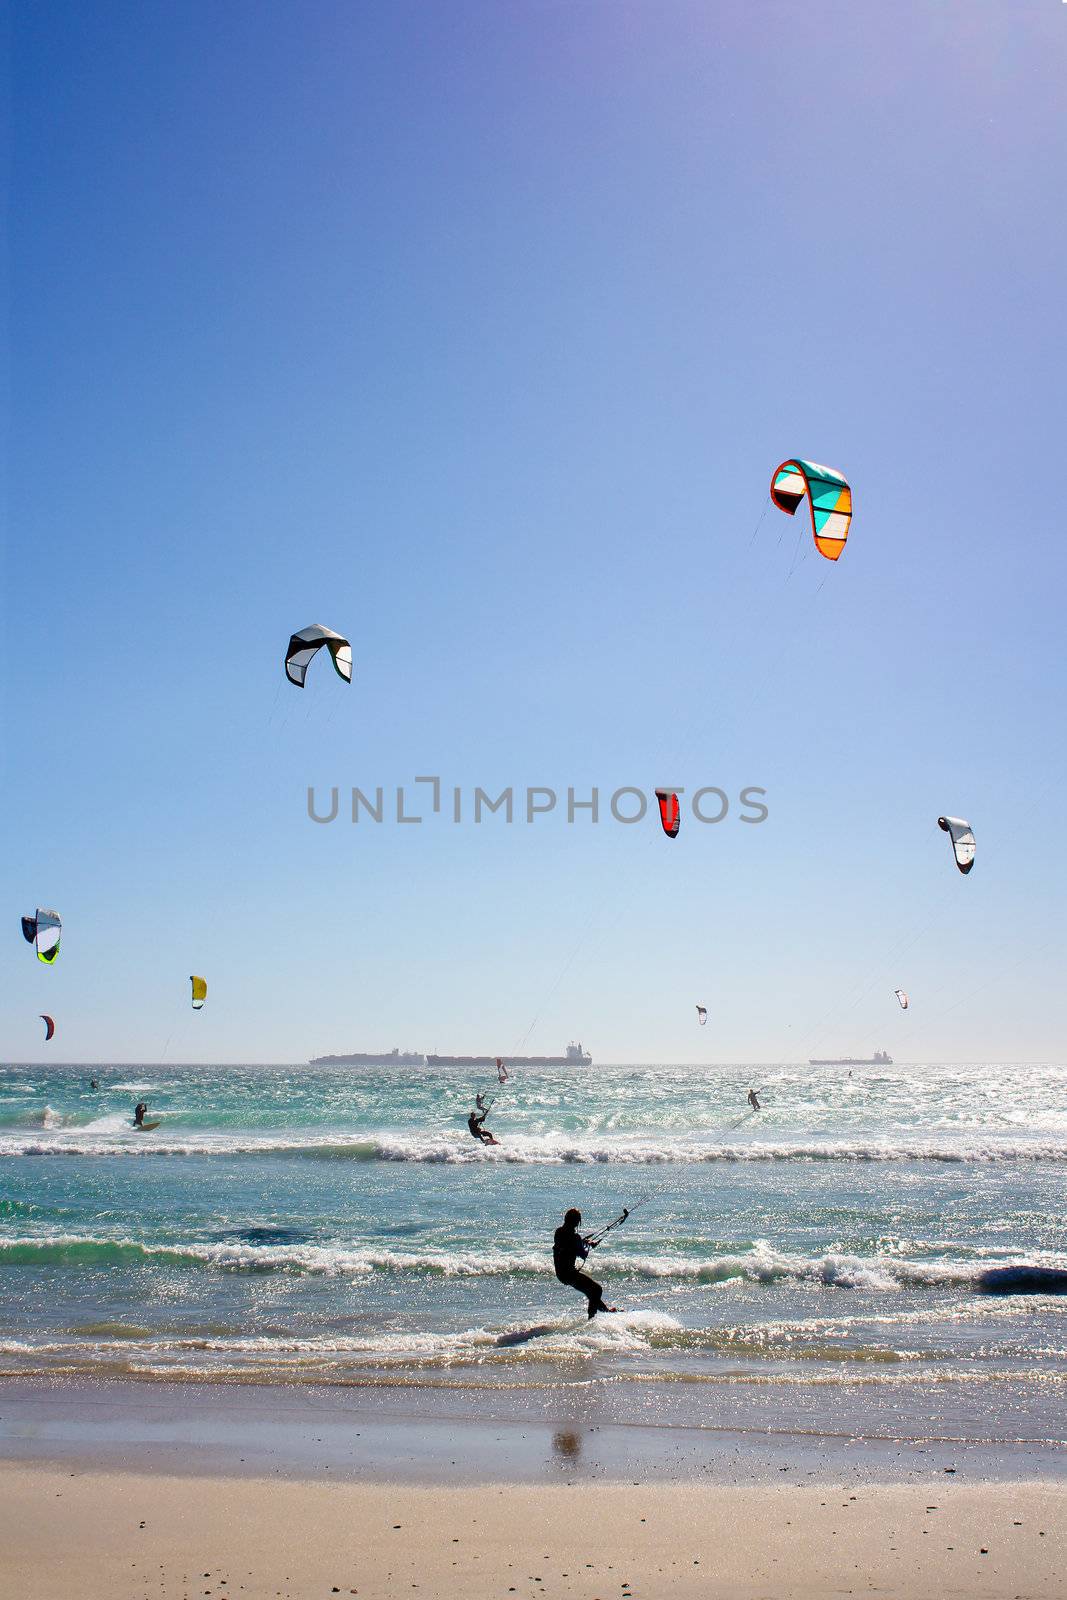 Kiteboarders at Milnerton Beach in Cape Town, South Africa